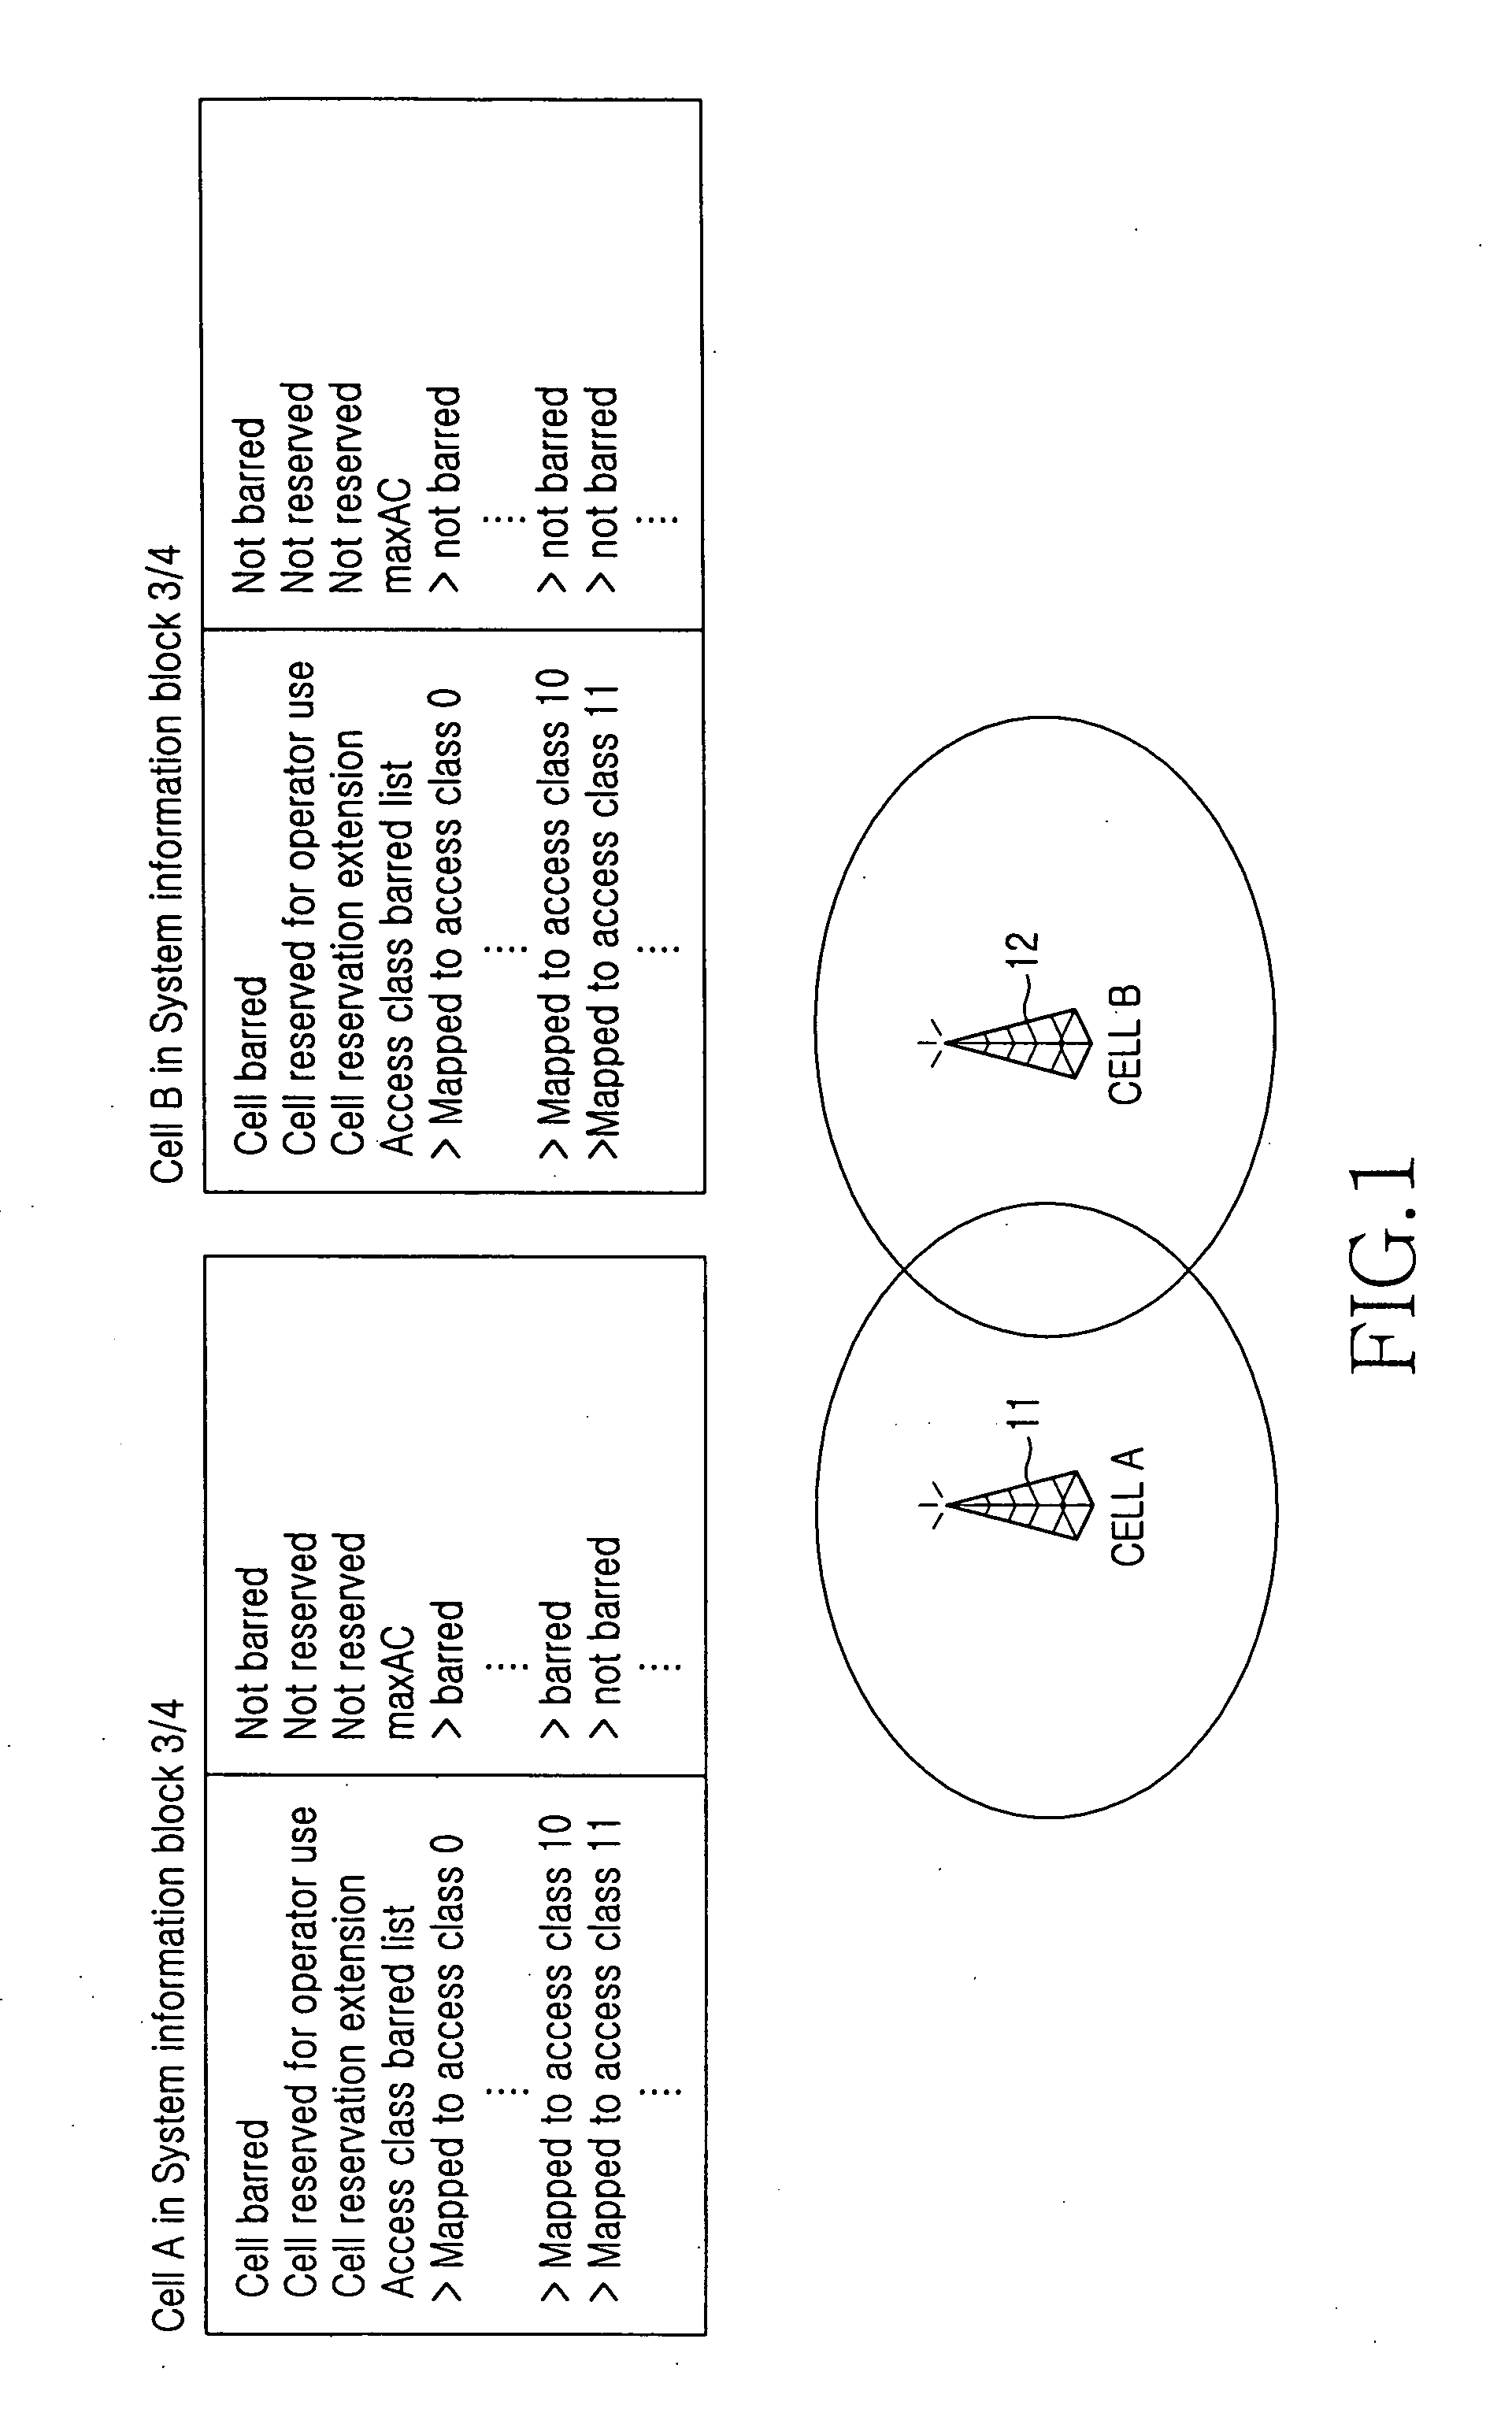 Method and system for cell selection/reselection taking into account congestion status of target cell in a mobile communication system